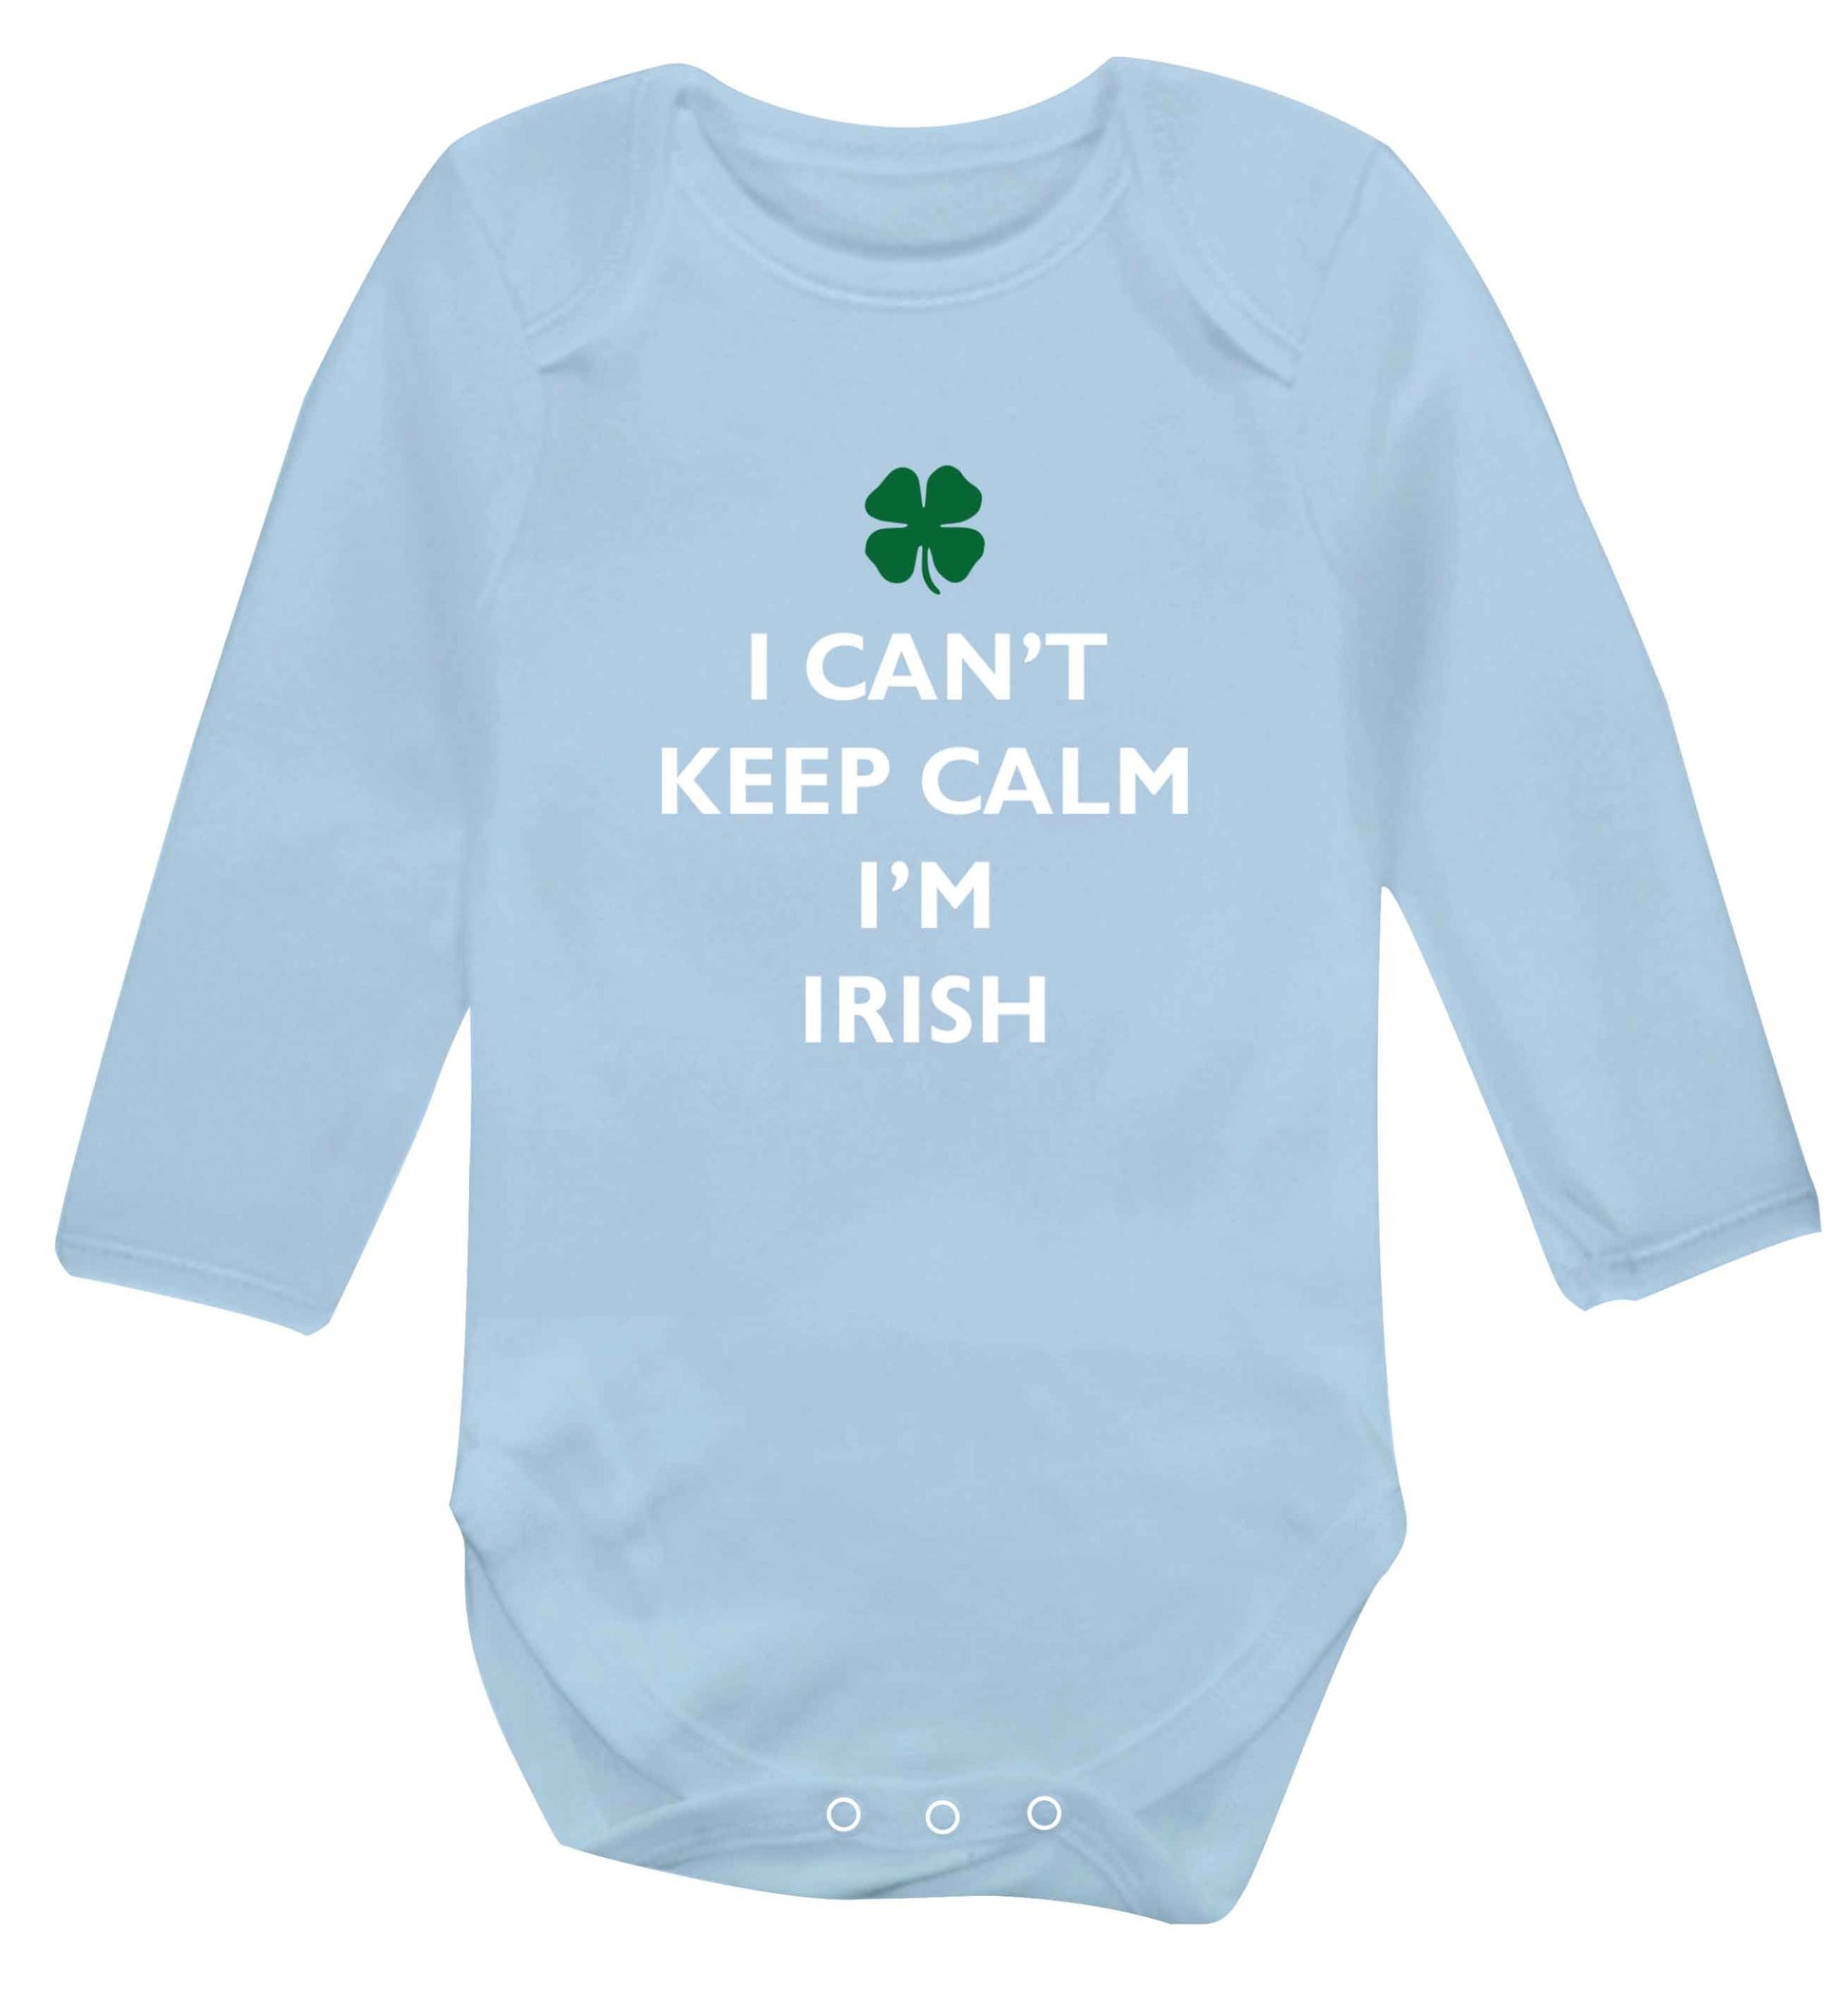 I can't keep calm I'm Irish baby vest long sleeved pale blue 6-12 months